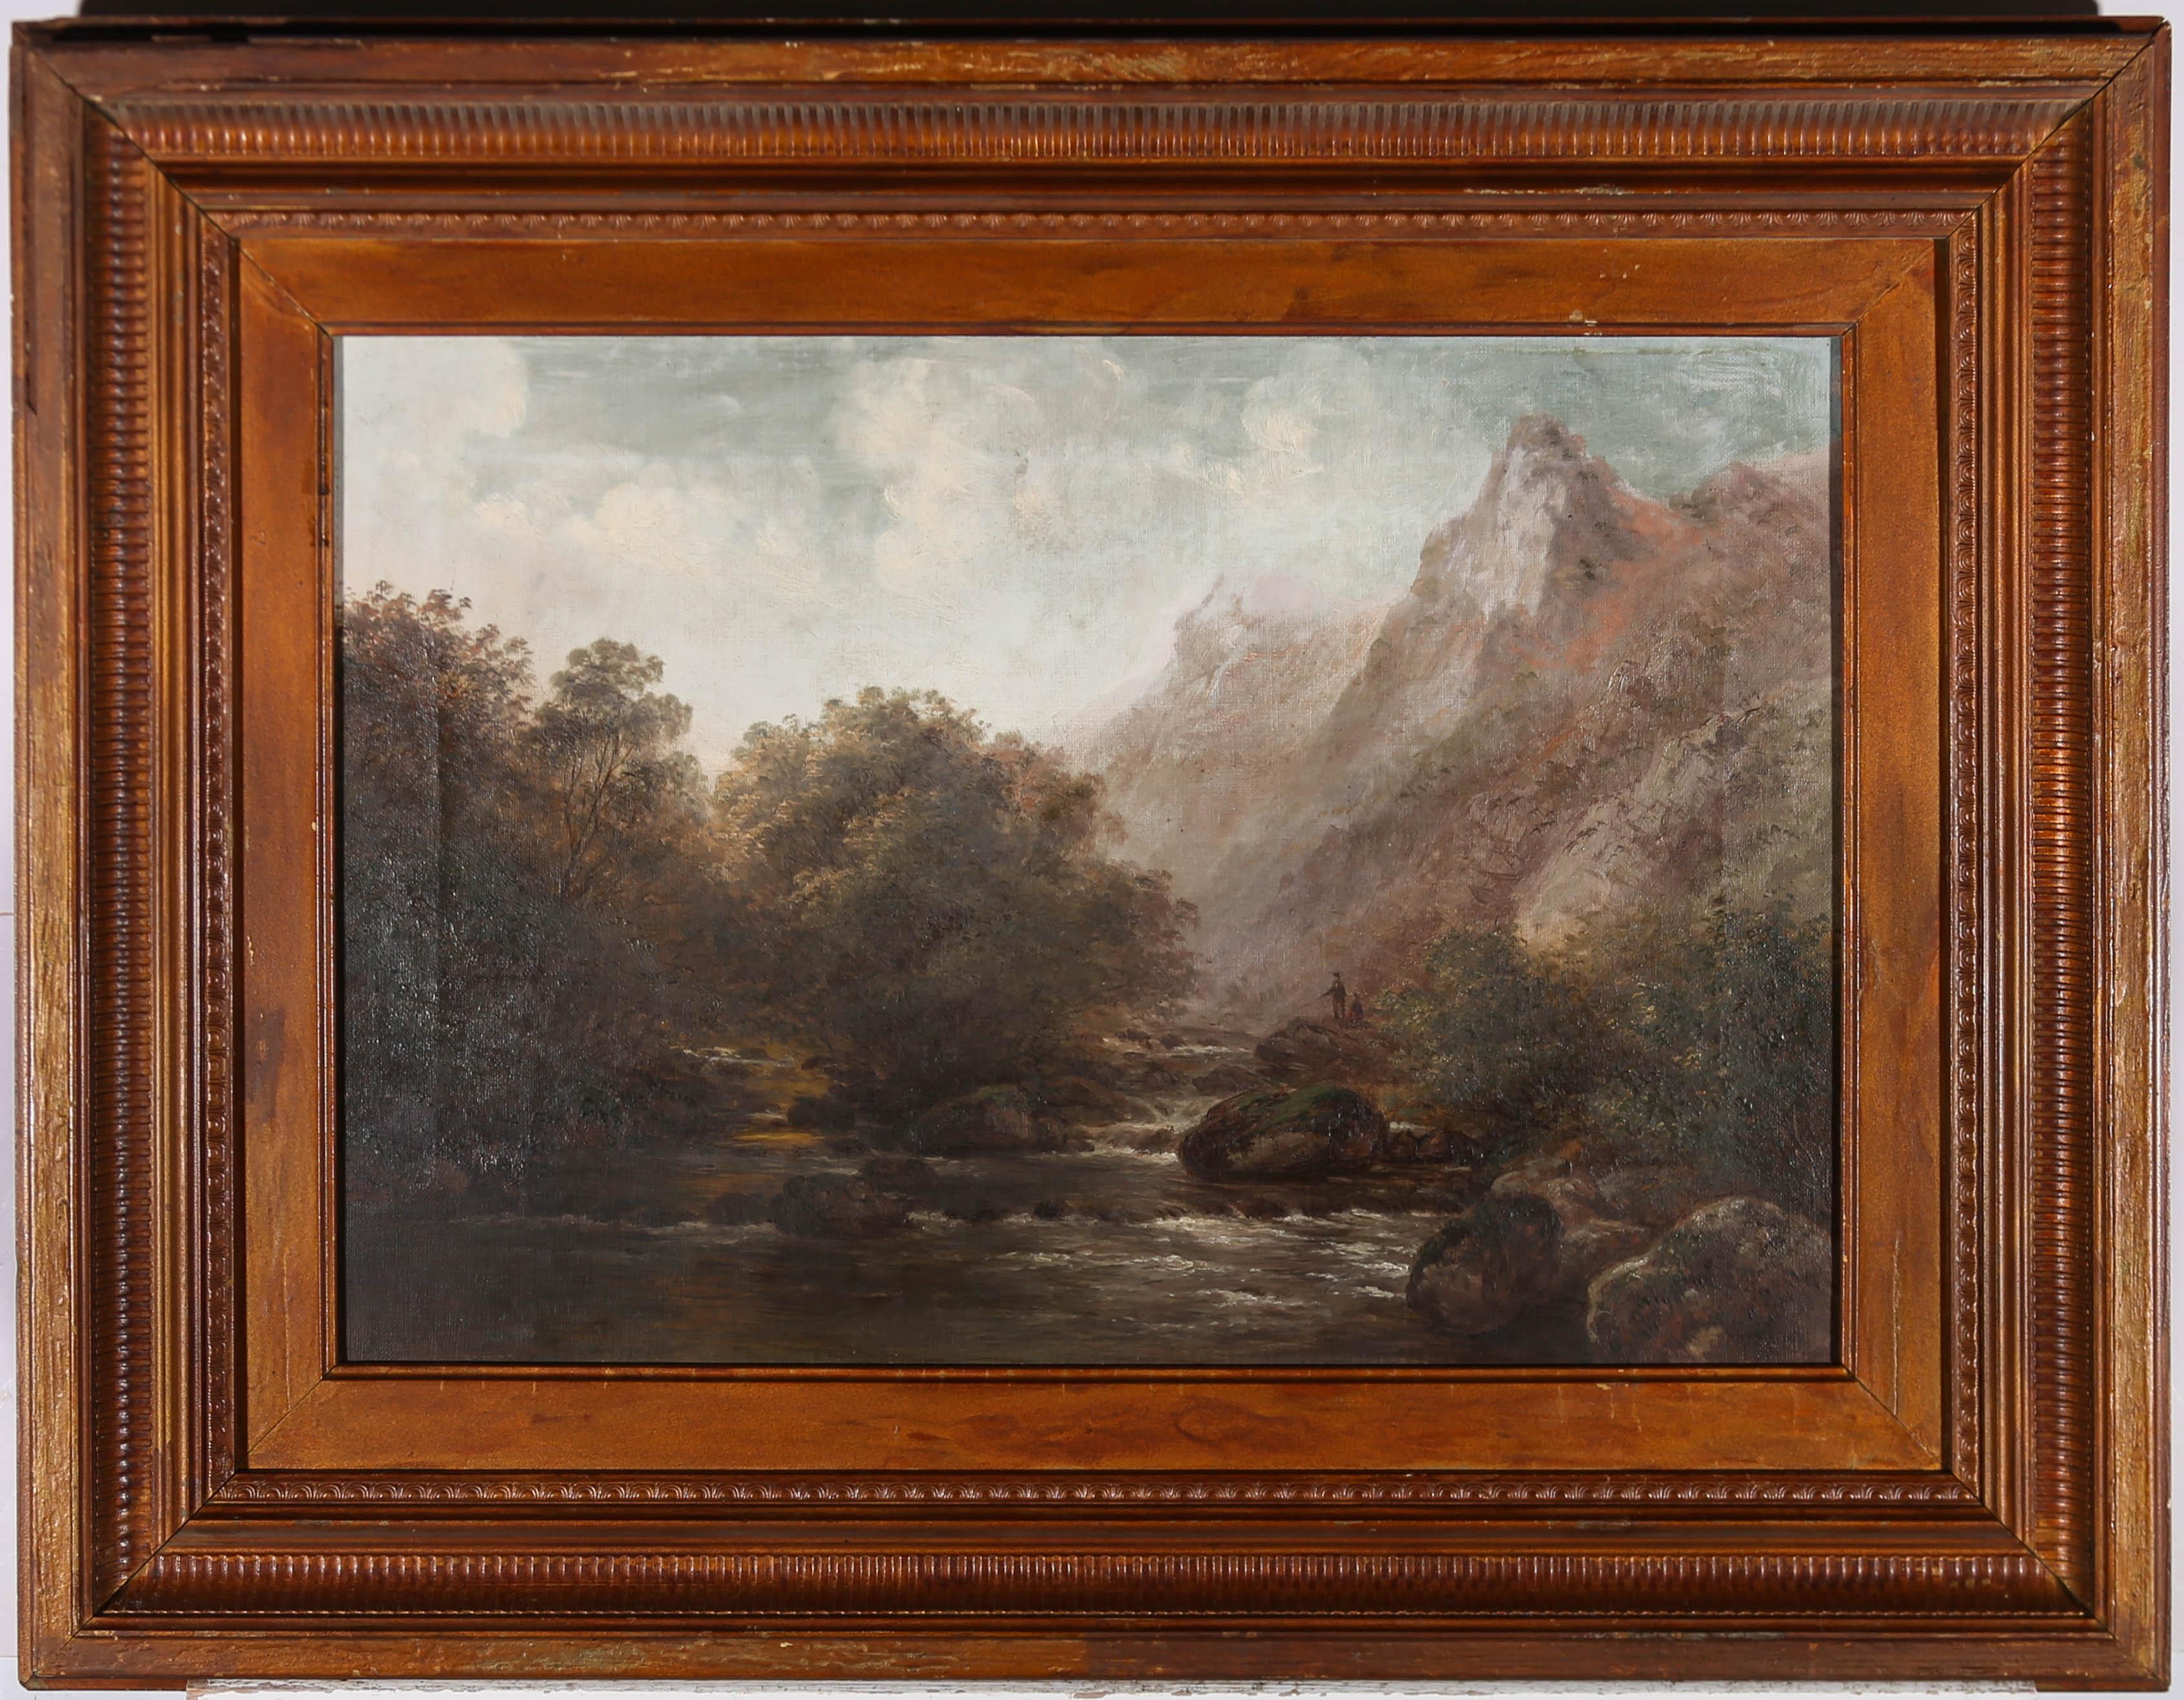 A charming oil on canvas of the sharp Tor of the Teign in Devon, UK. We can see the river running past with a pair of fisherman patiently waiting for their catch on the river bank beneath the tor. Signed and inscribed with the location to the